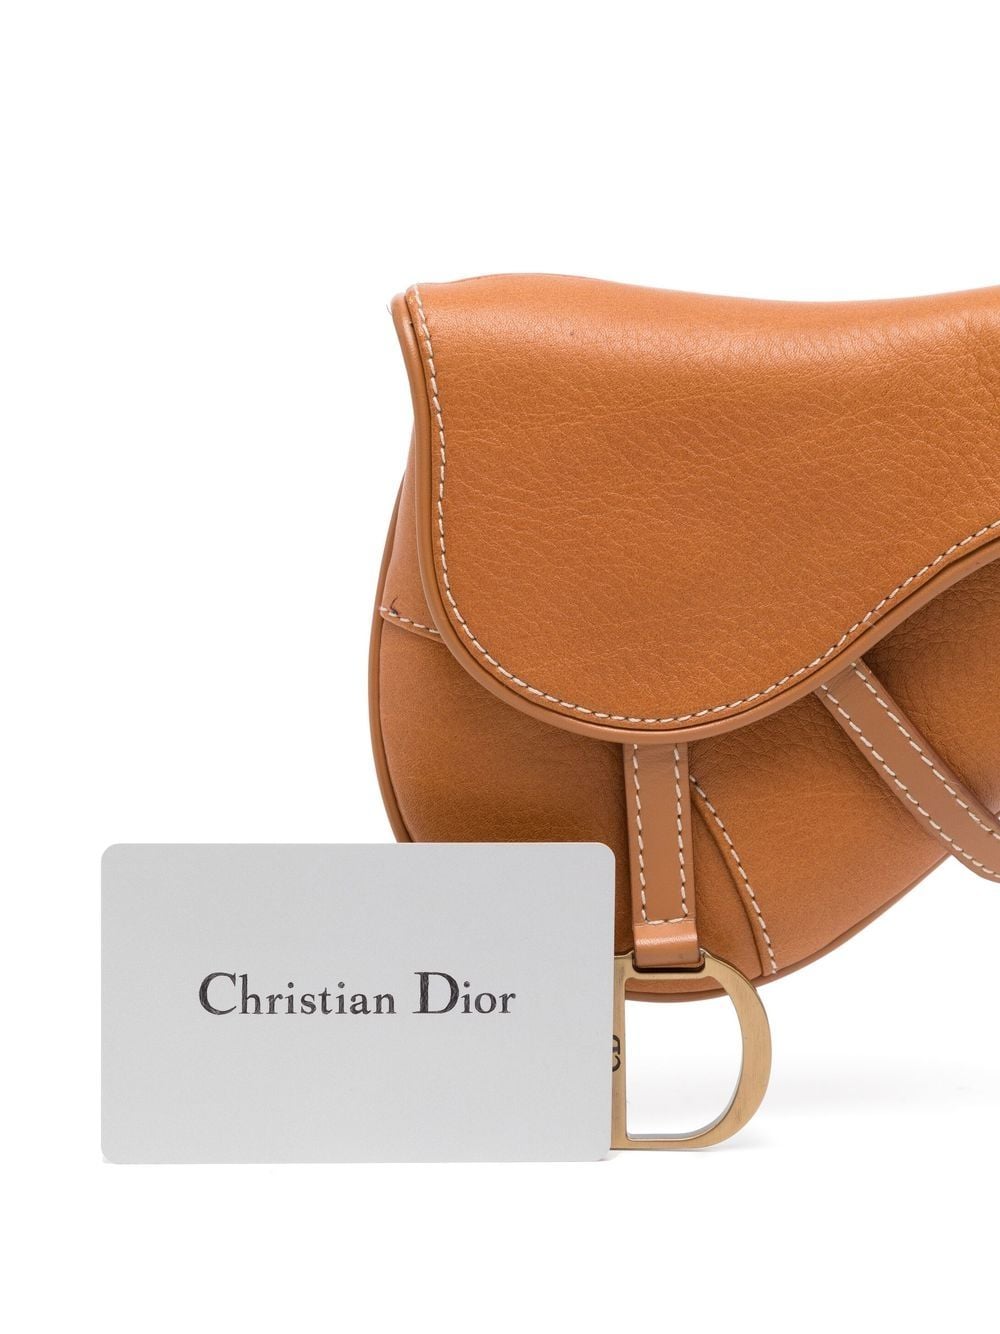 Preowned Dior Natural Canvas  Brown Leather Saddle Bag  ModeSens  Dior  saddle bag Bags Leather saddle bags